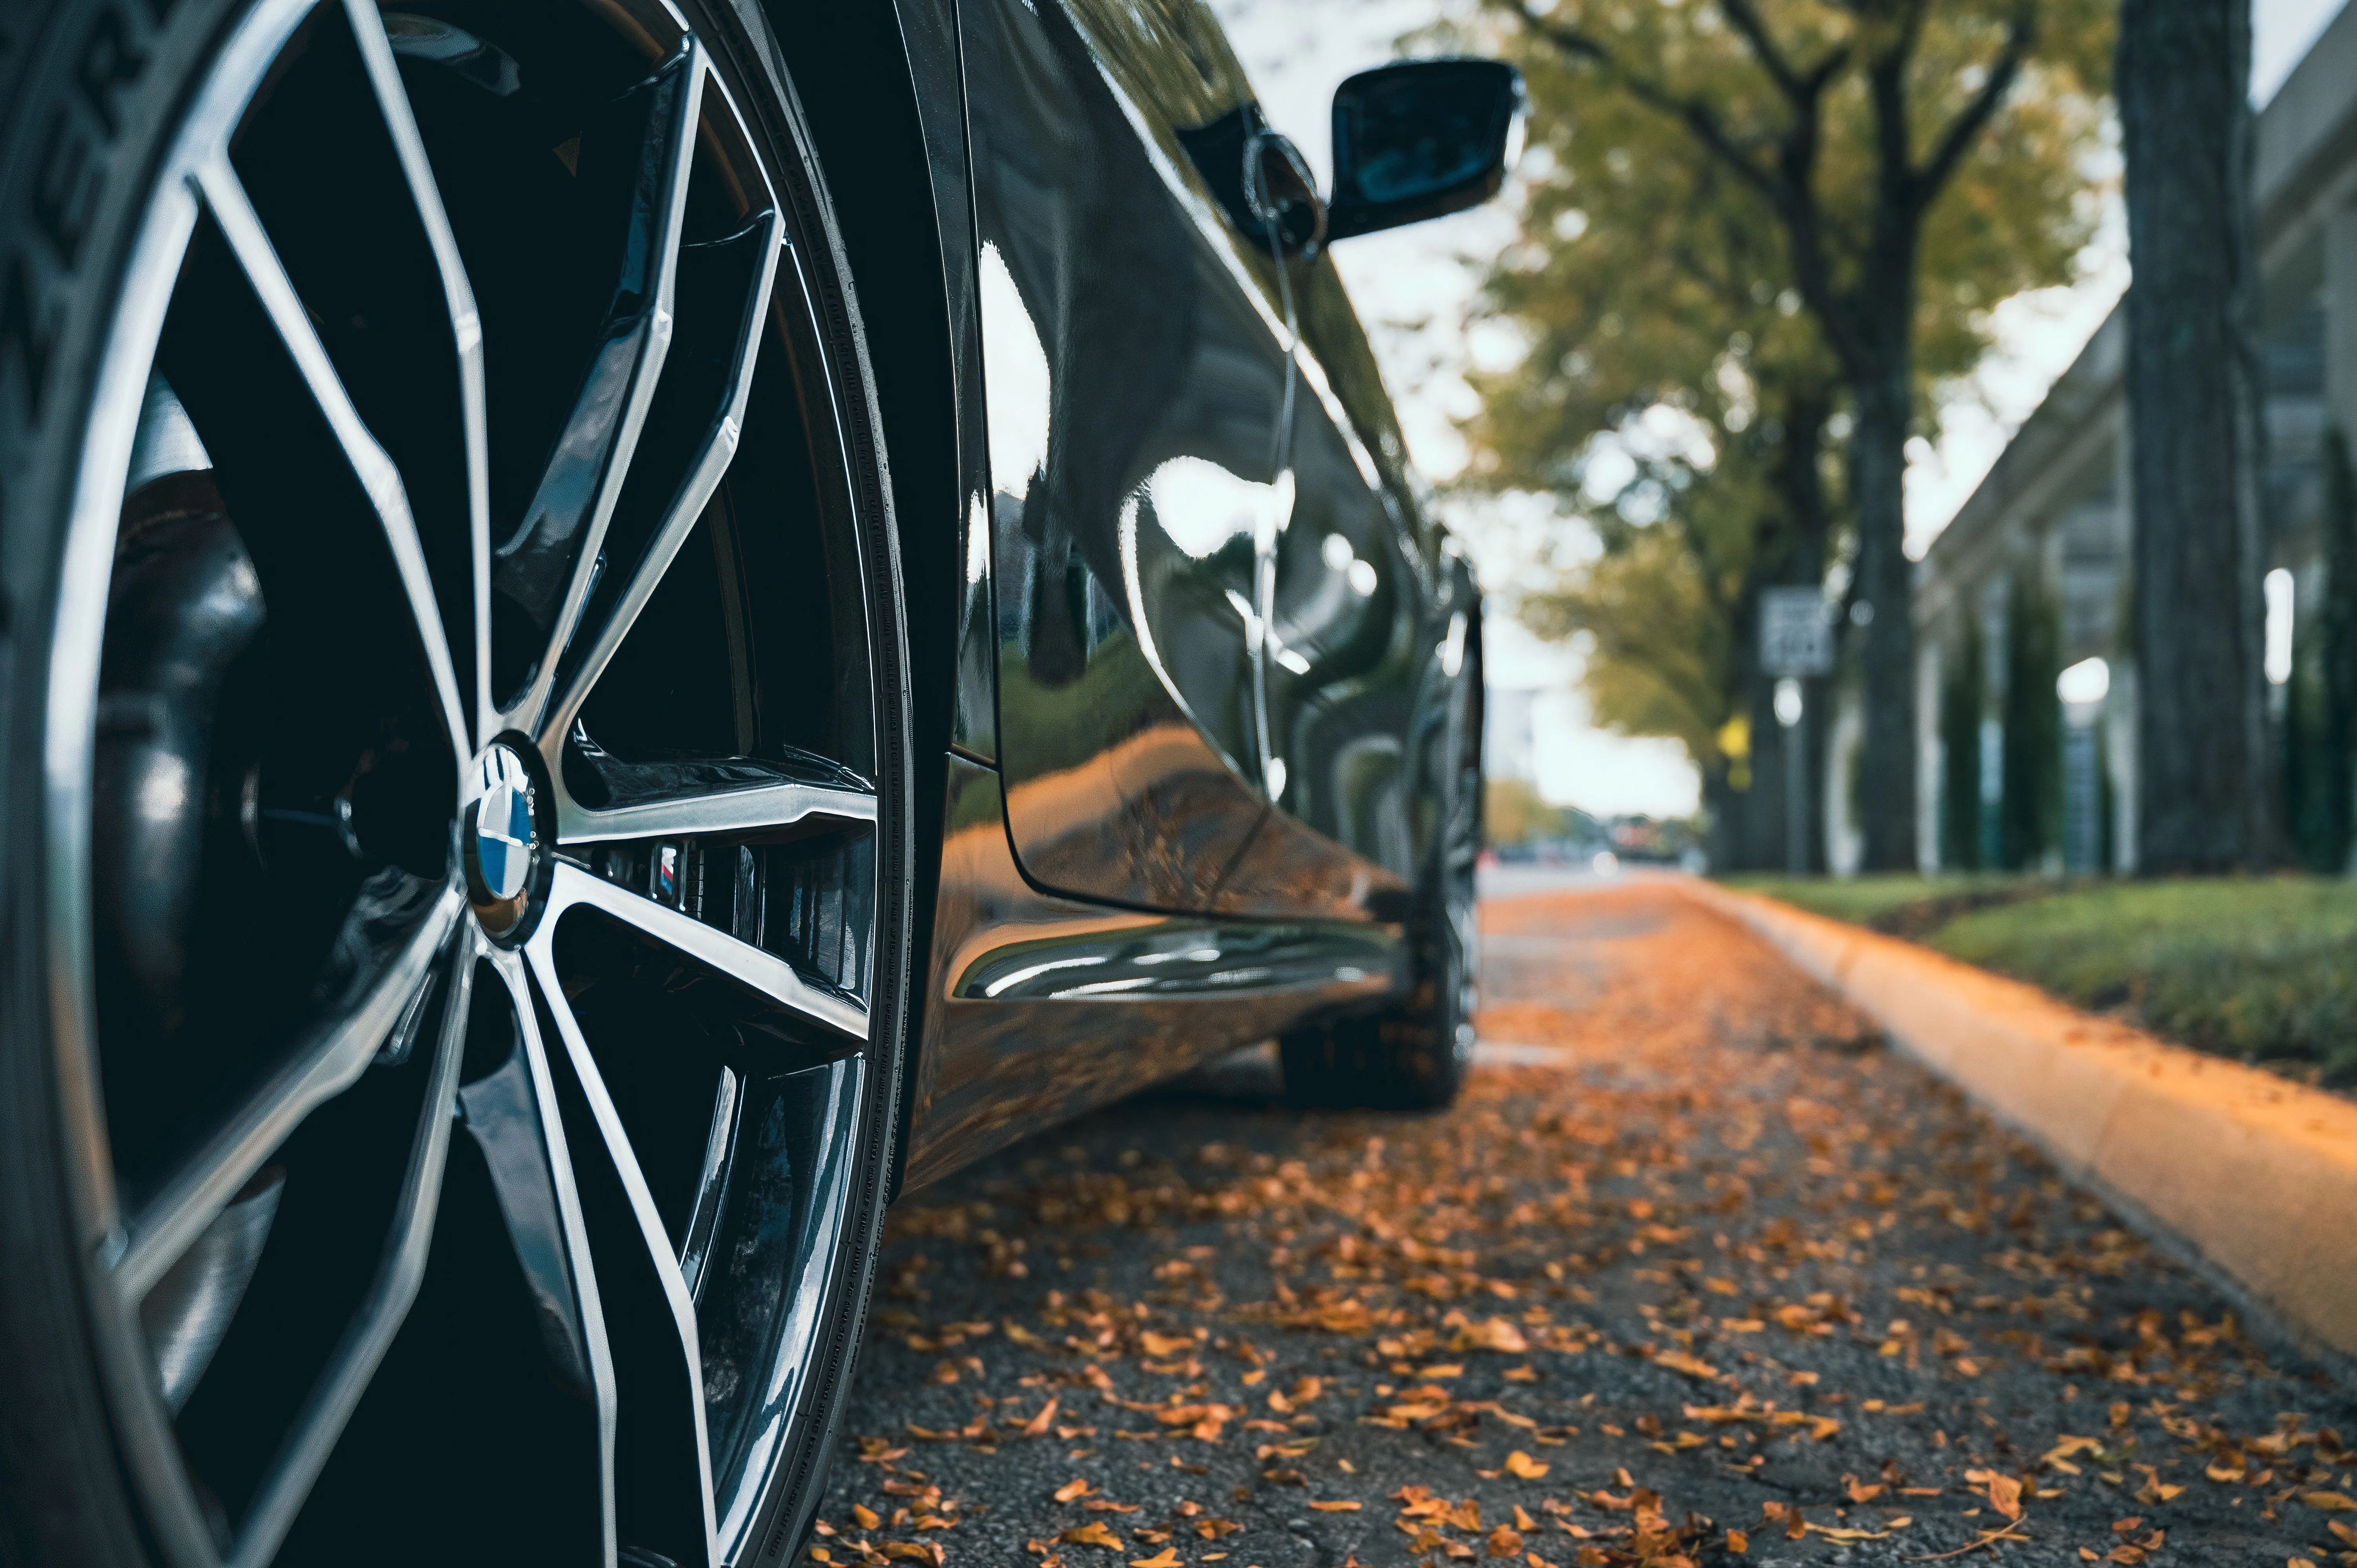 Close-up of a car's shiny alloy wheel parked on a tree-lined urban street with fallen leaves on the pavement.